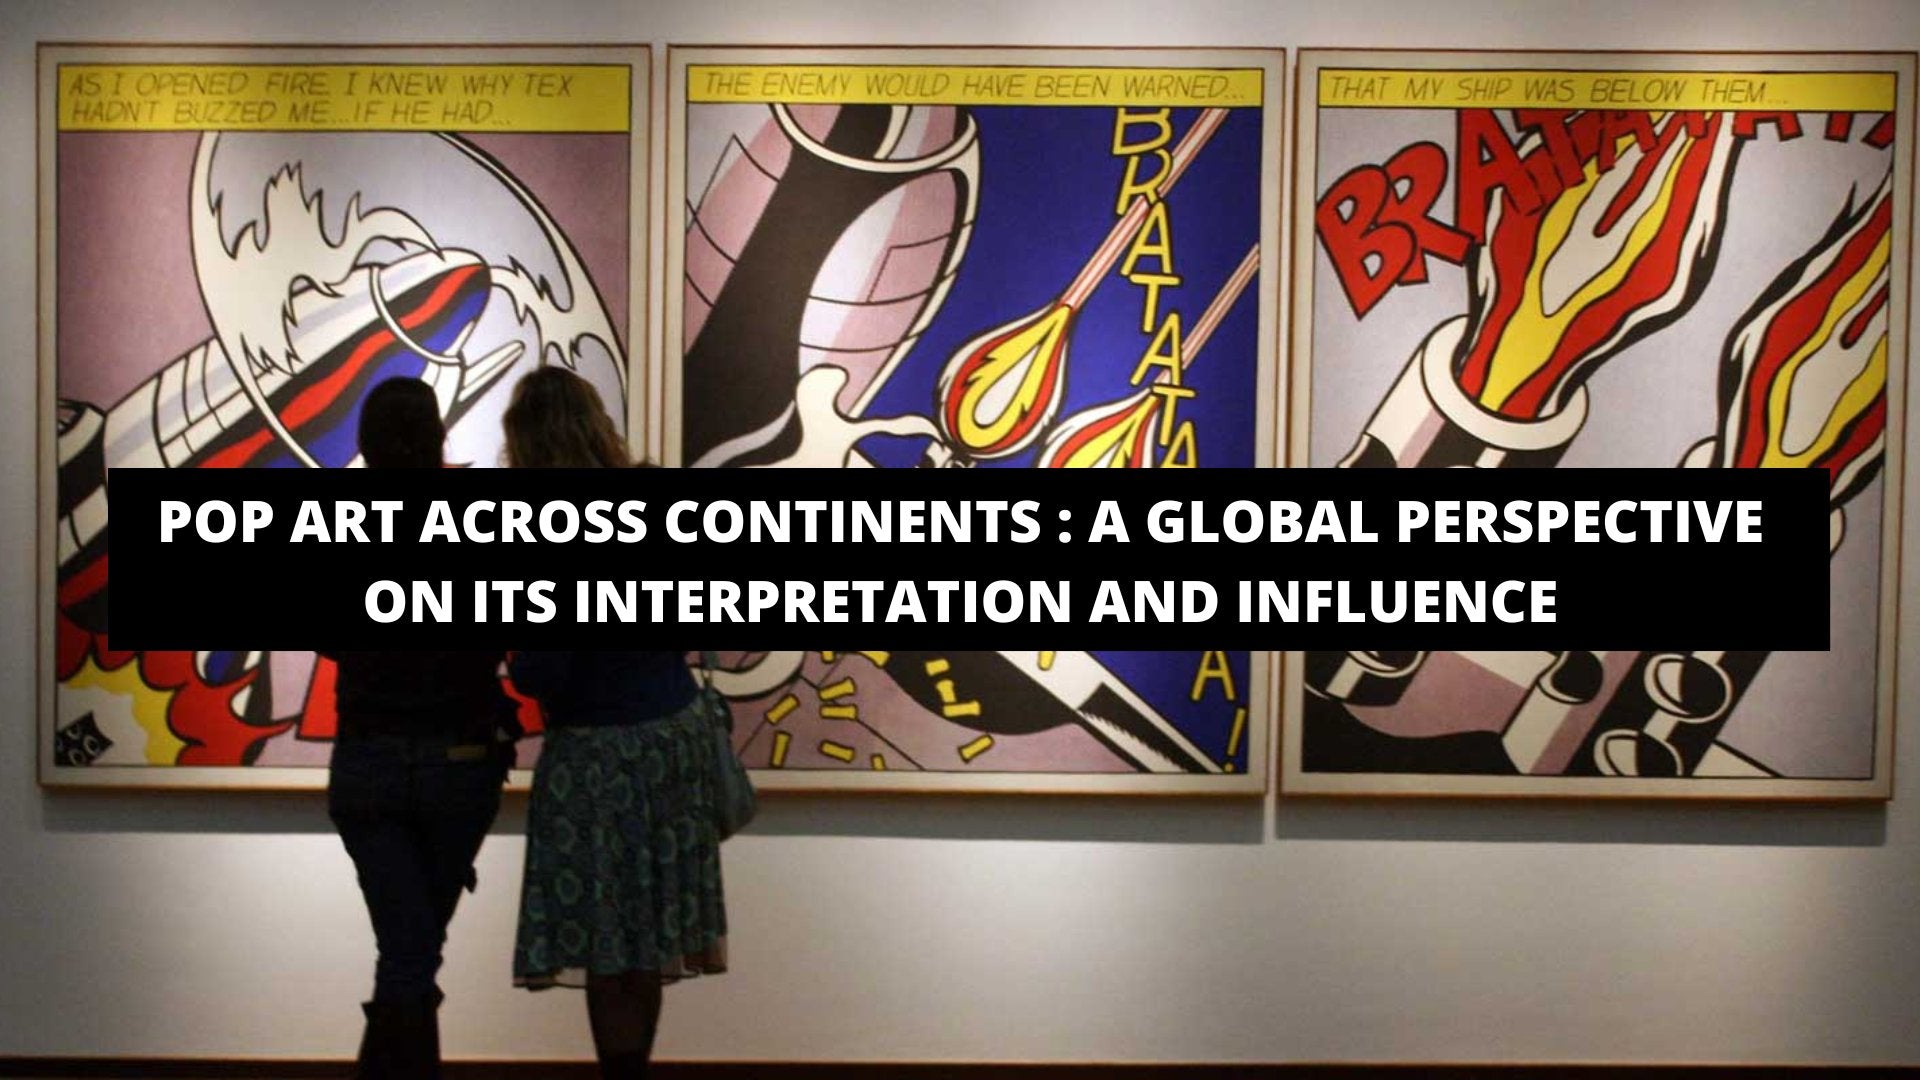 Pop Art Across Continents: A Global Perspective On Its Interpretation And Influence - The Trendy Art